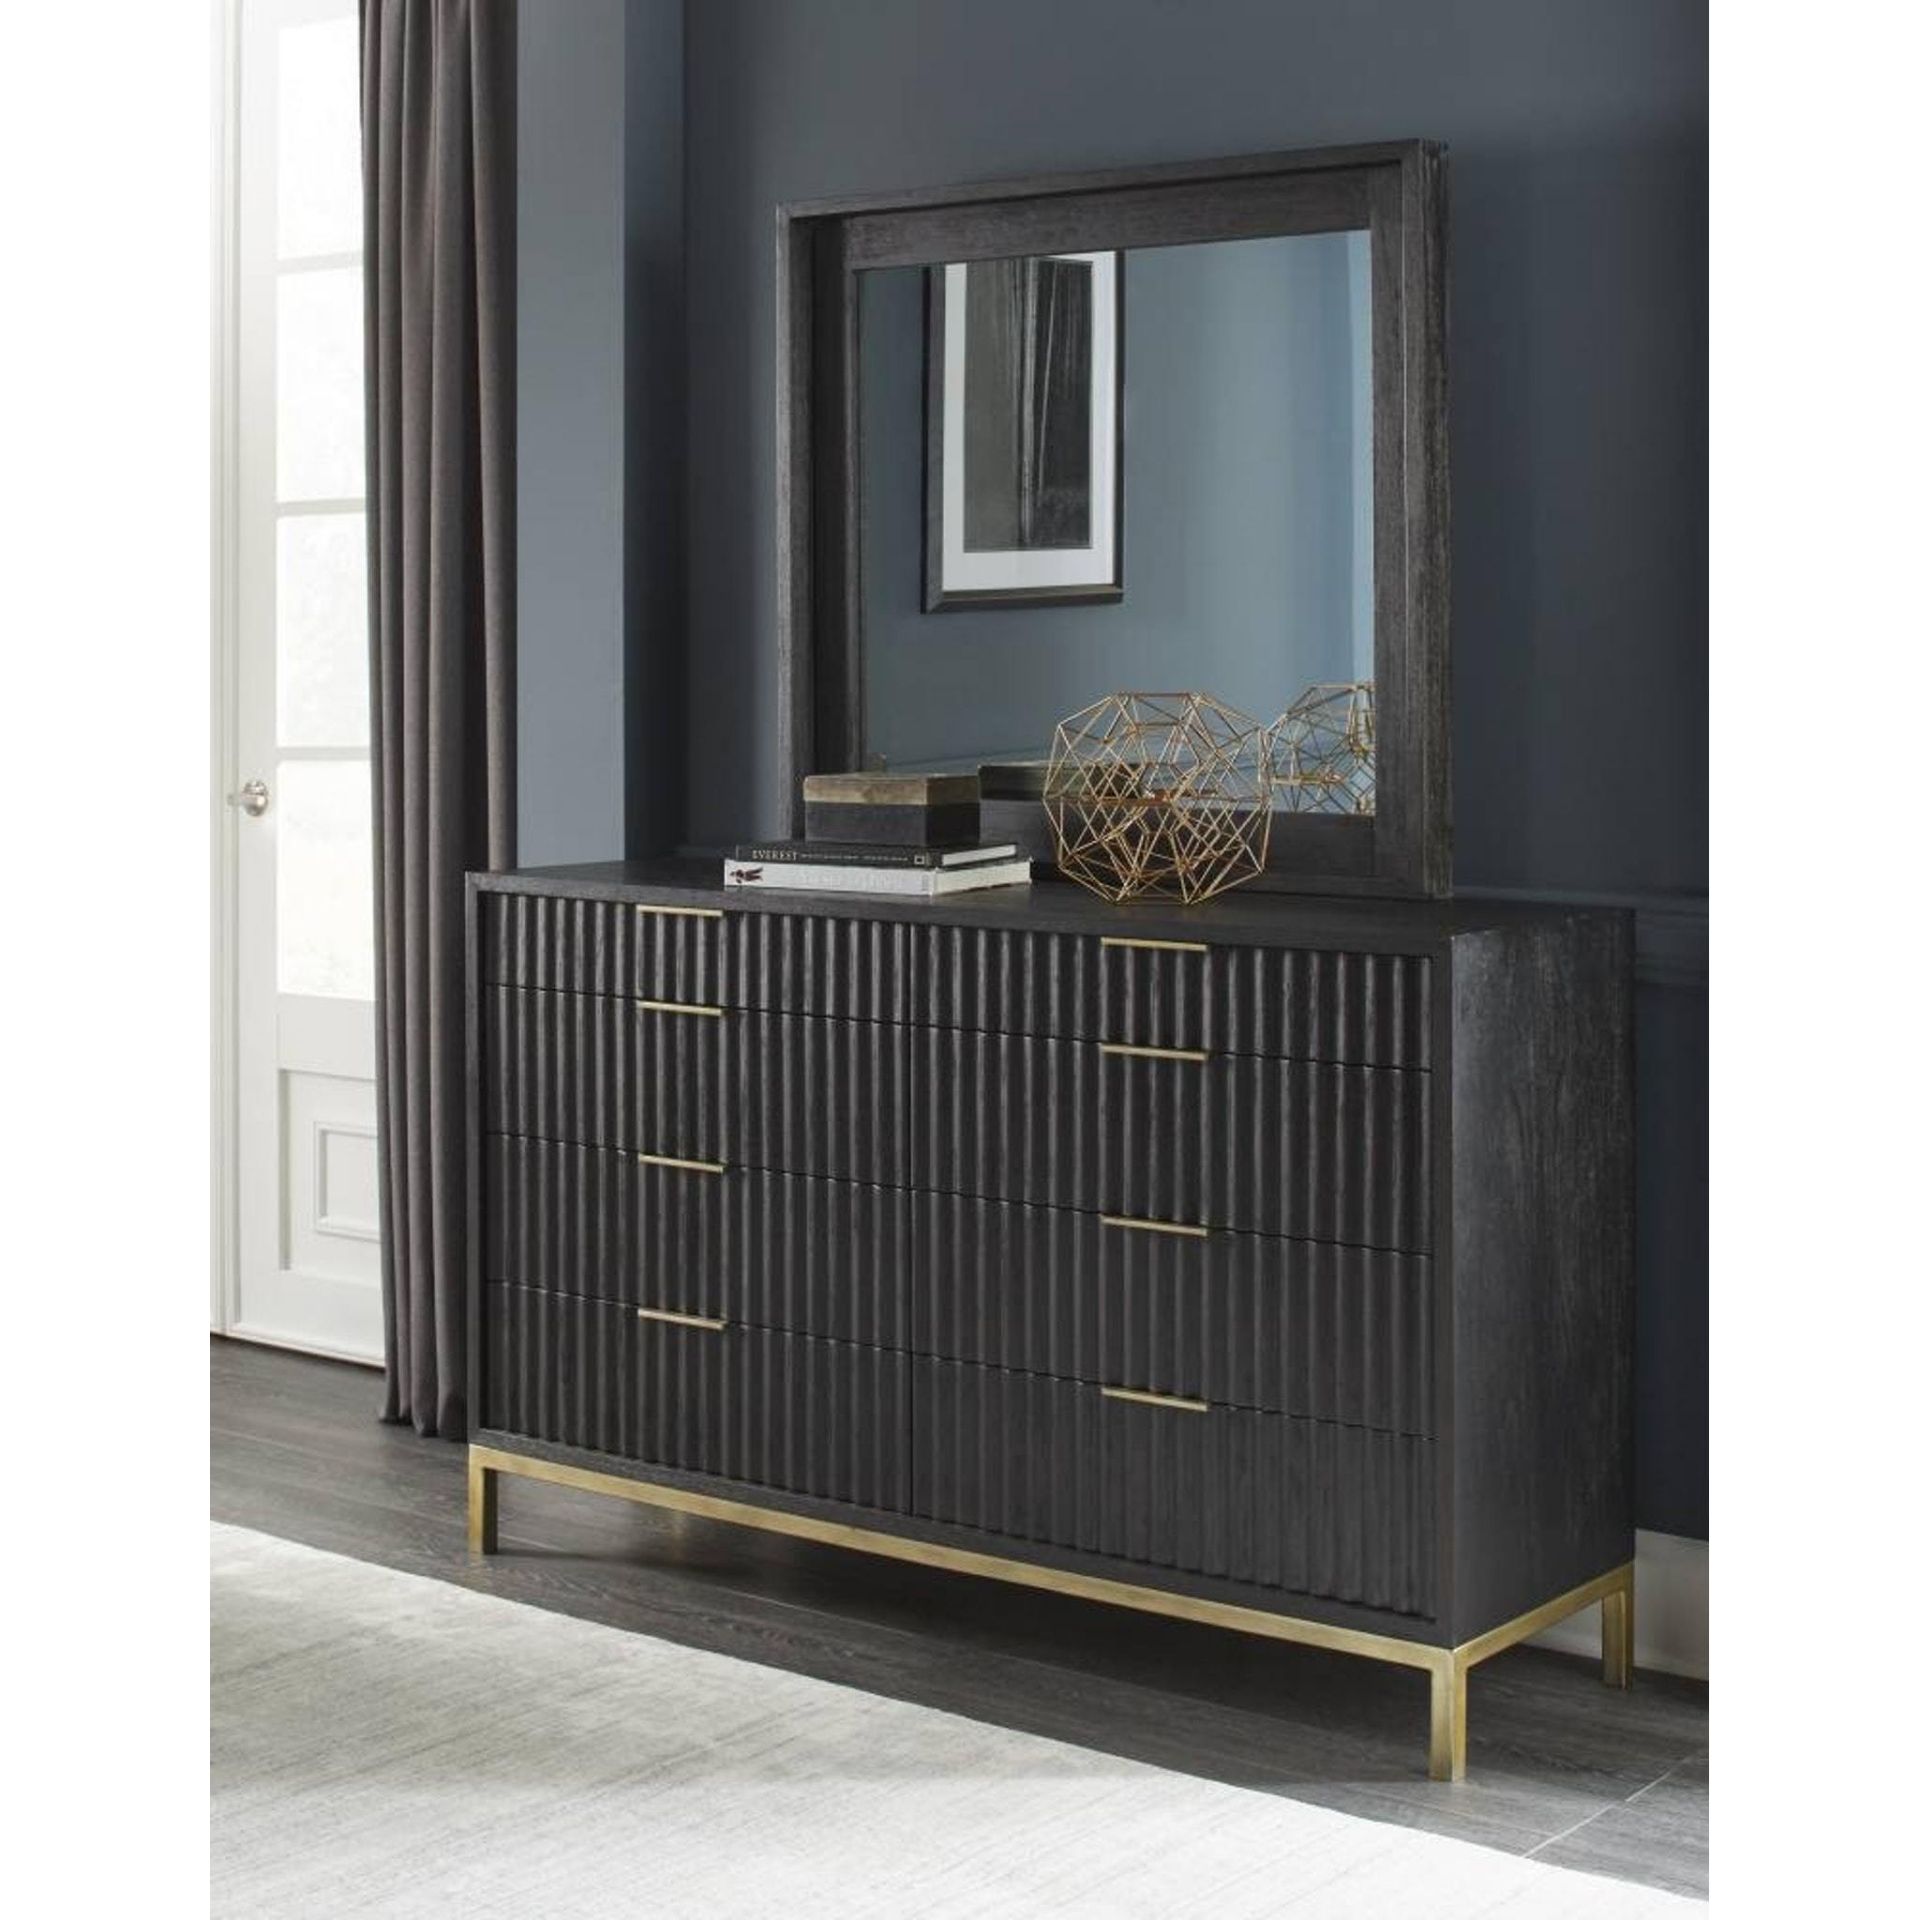 UNBOXED KENTFIELD SOLID WOOD DRESSER IN BLACK/GOLD RRP £1000Condition ReportPLEASE SEE IMAGES OF